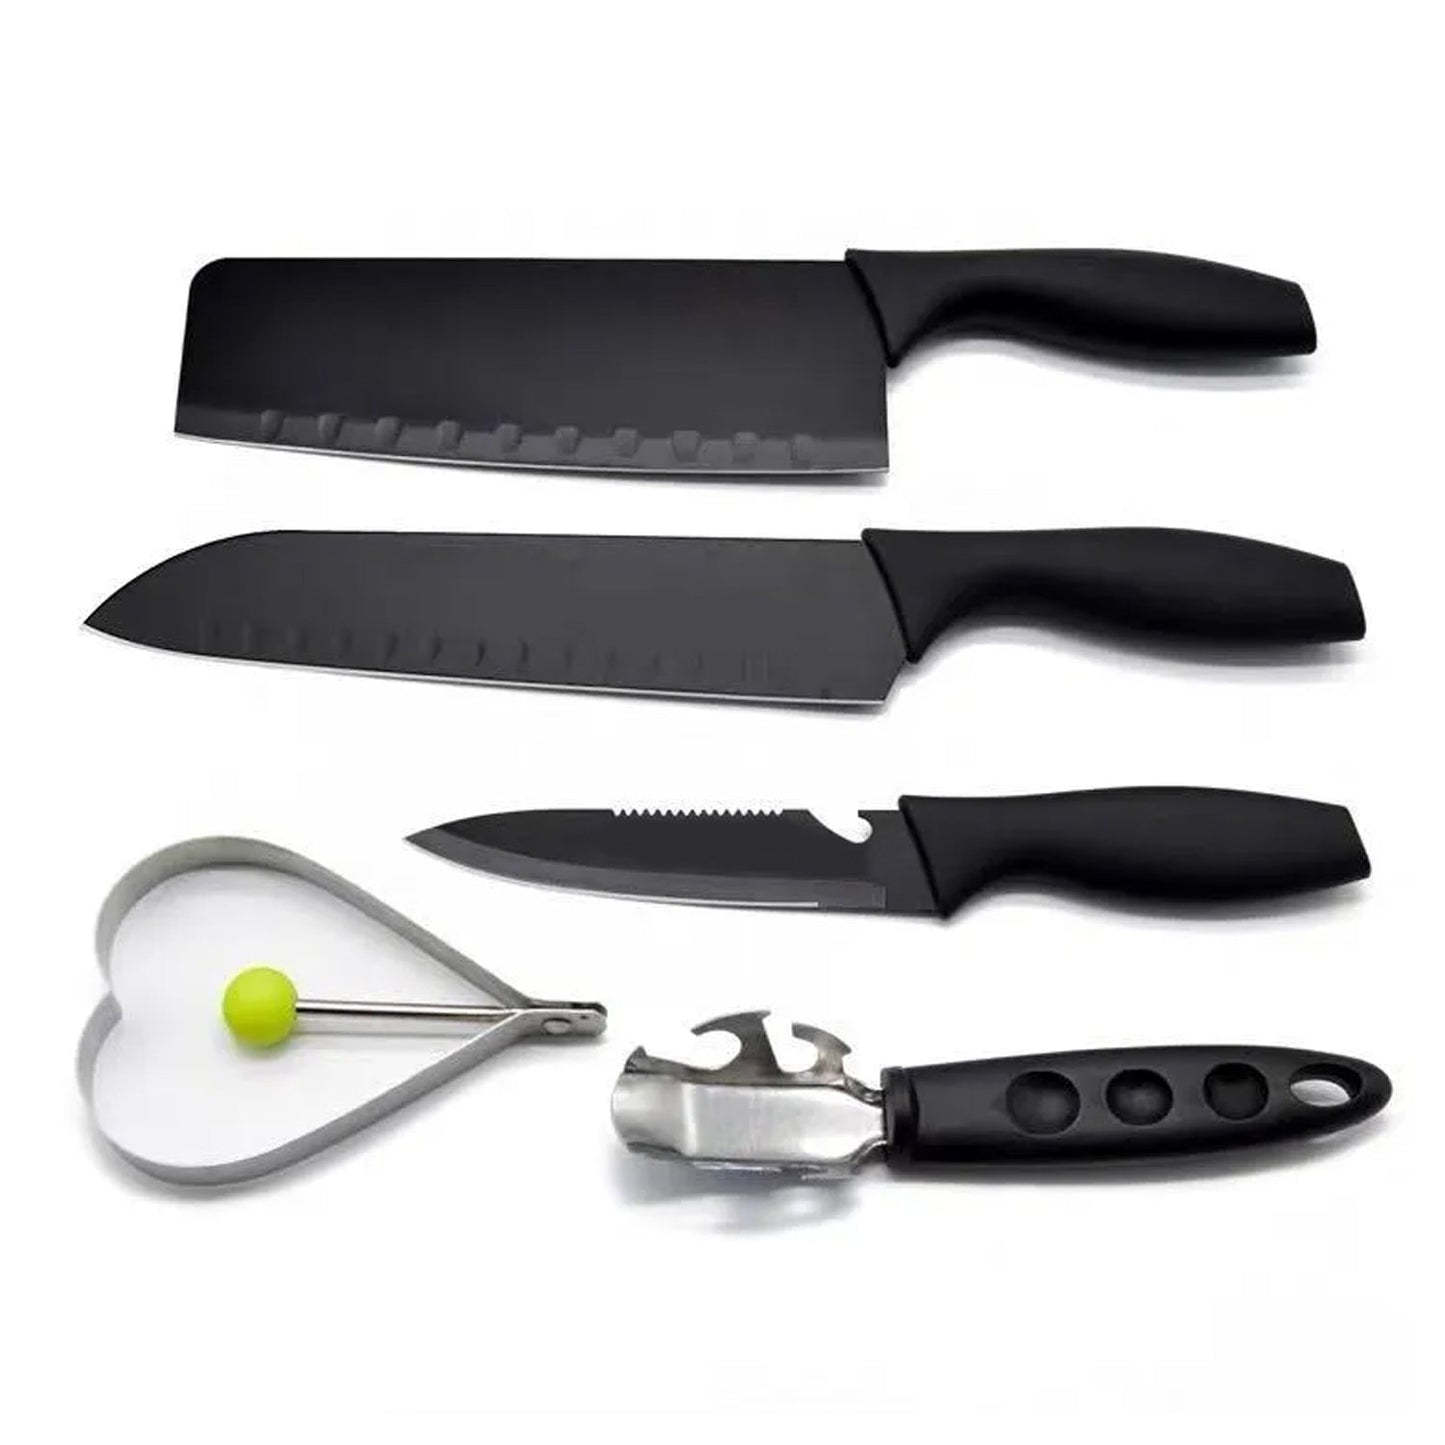 Kitchen Chef Cutlery Stainless Steel Knife Set, Chopping Knife, Chef Knife, Utility Knife, Butcher Knife (Pack of 5pc).